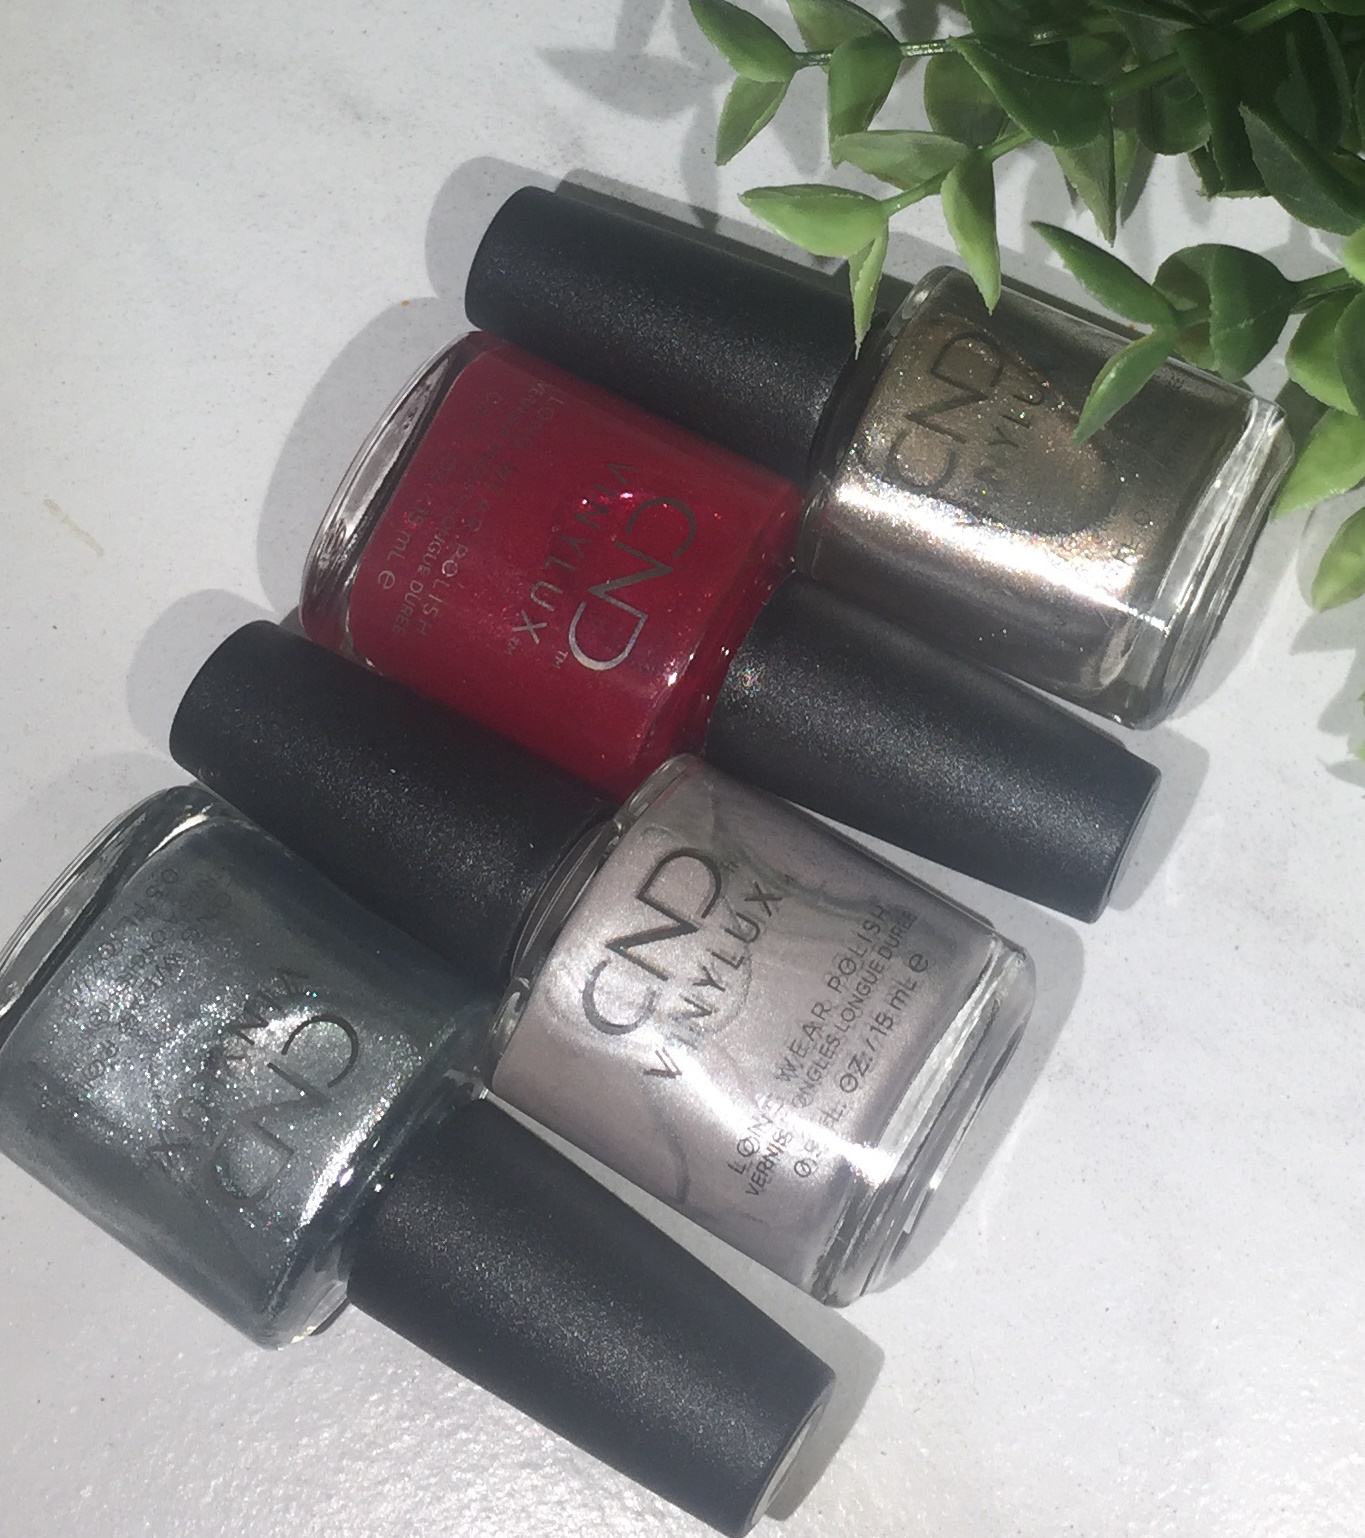 CND, CND Vinylux, Vinylux, CND Danmark, Soirée Strut, Kiss Of Fire, After Hours, Bellini, Swatch, Swatches, Night Moves The Collection, Swatches Night Moves,